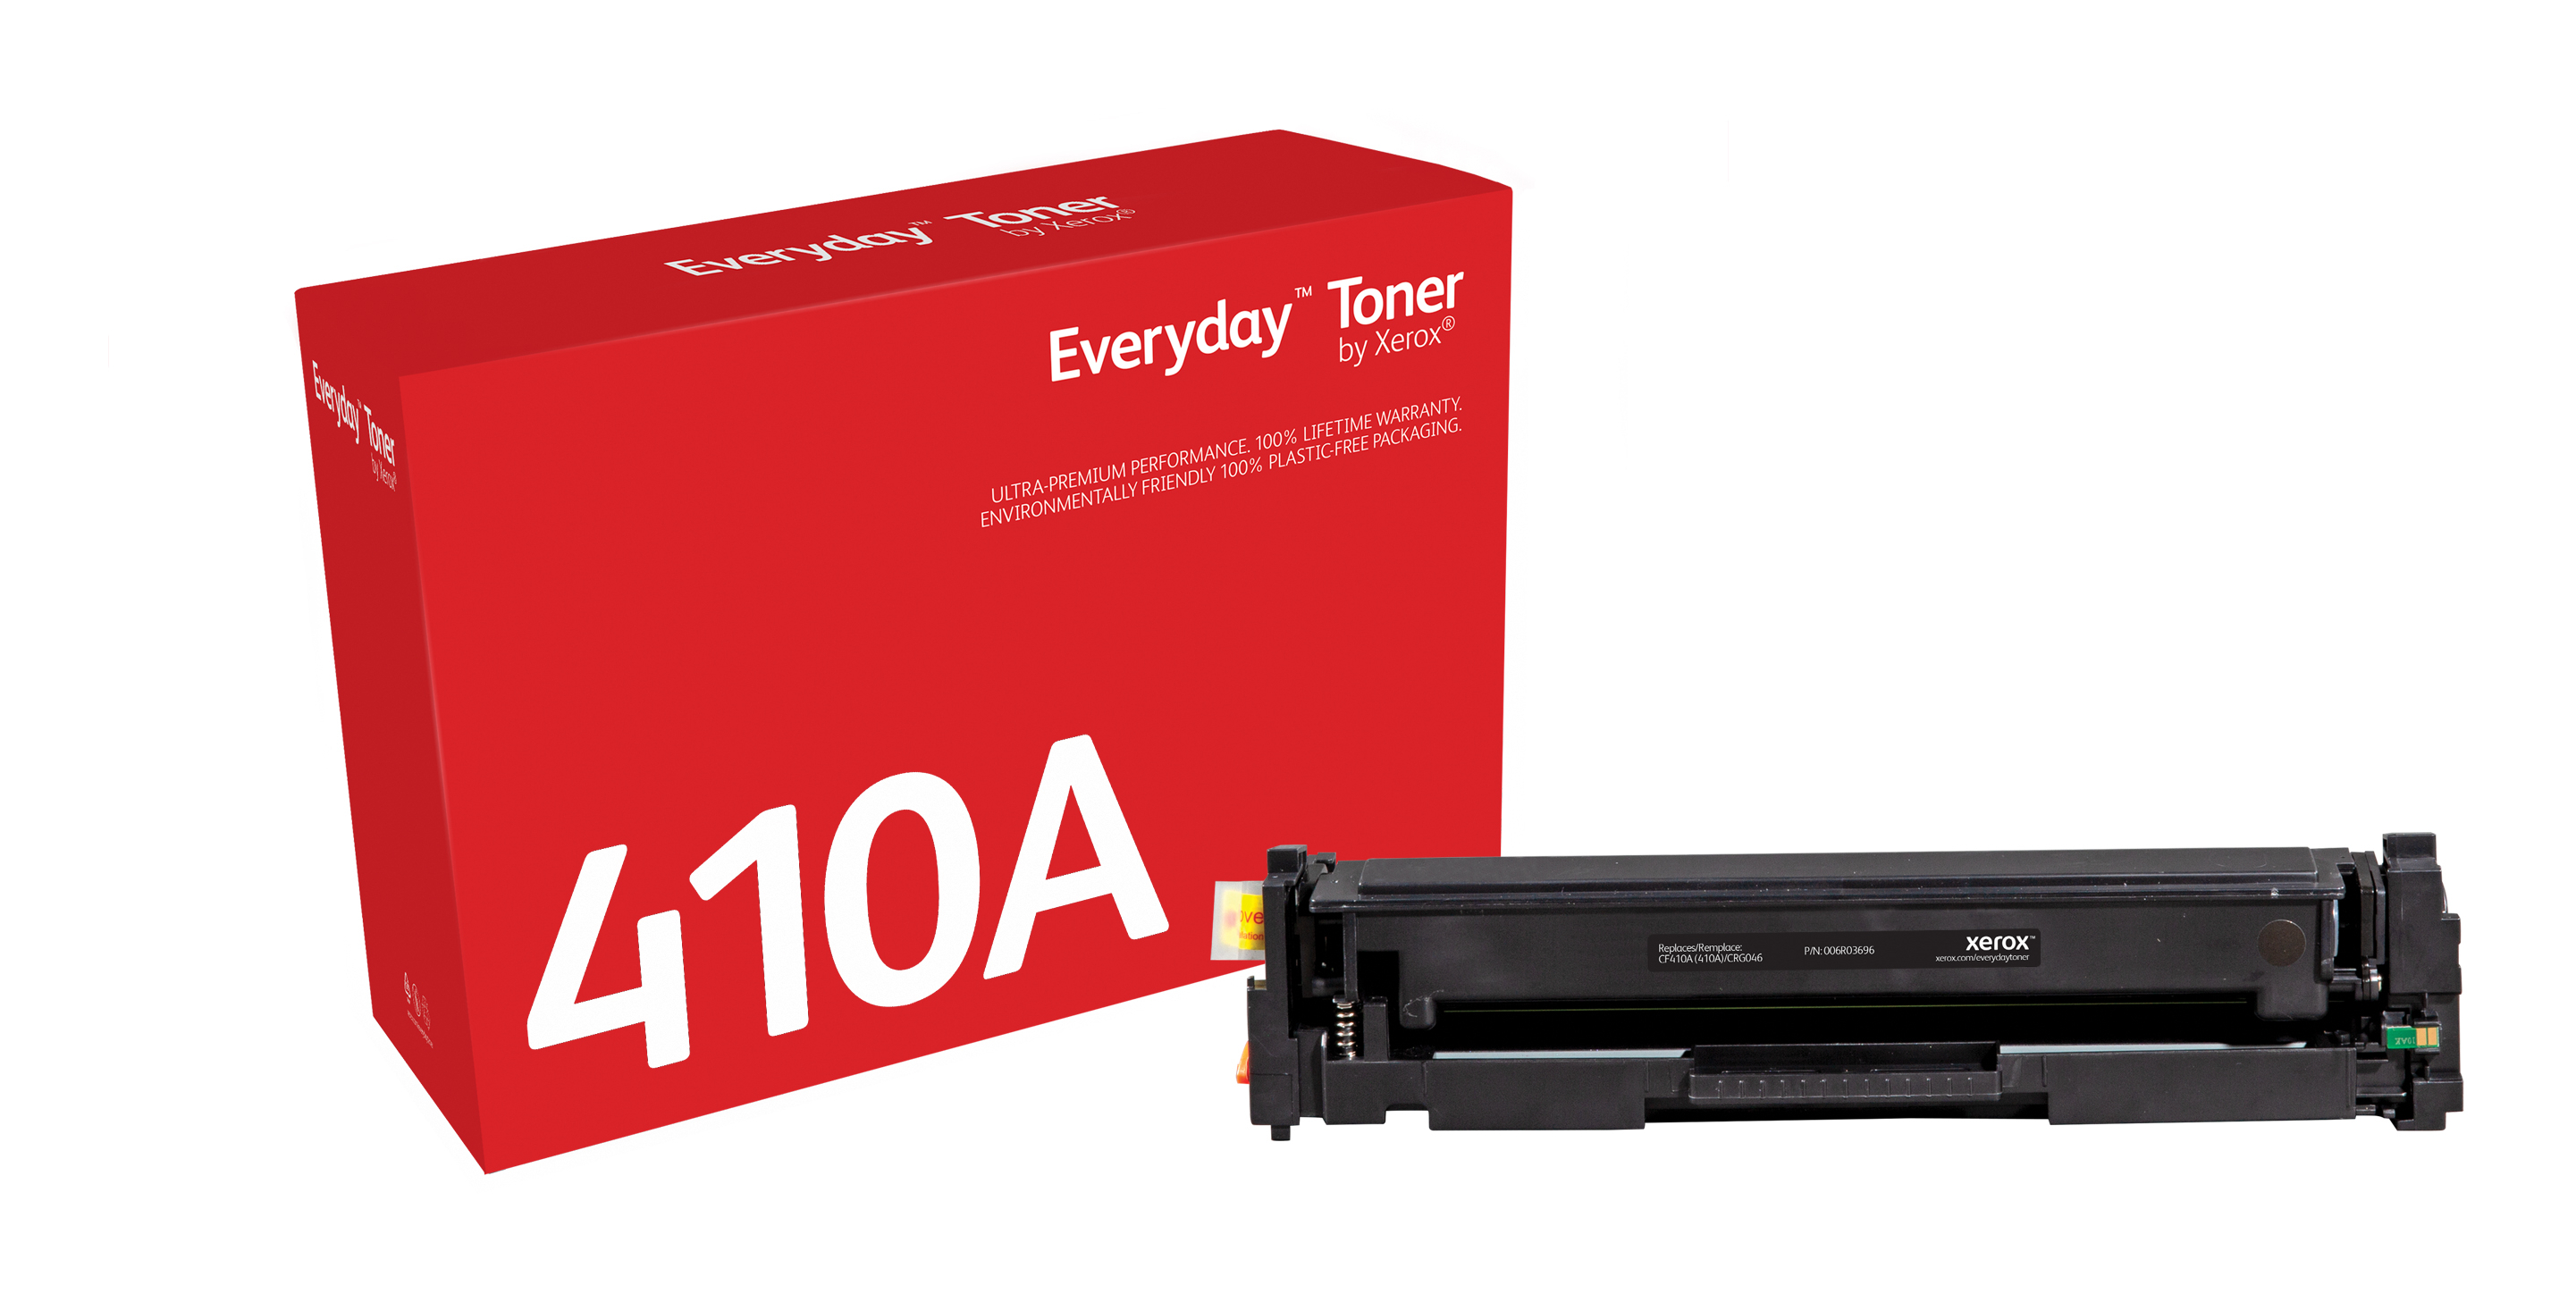 Everyday™ Black Toner by Xerox compatible with HP 201A (CF410A/ CRG-046BK),  Standard Yield 006R03696 Genuine Xerox Supplies